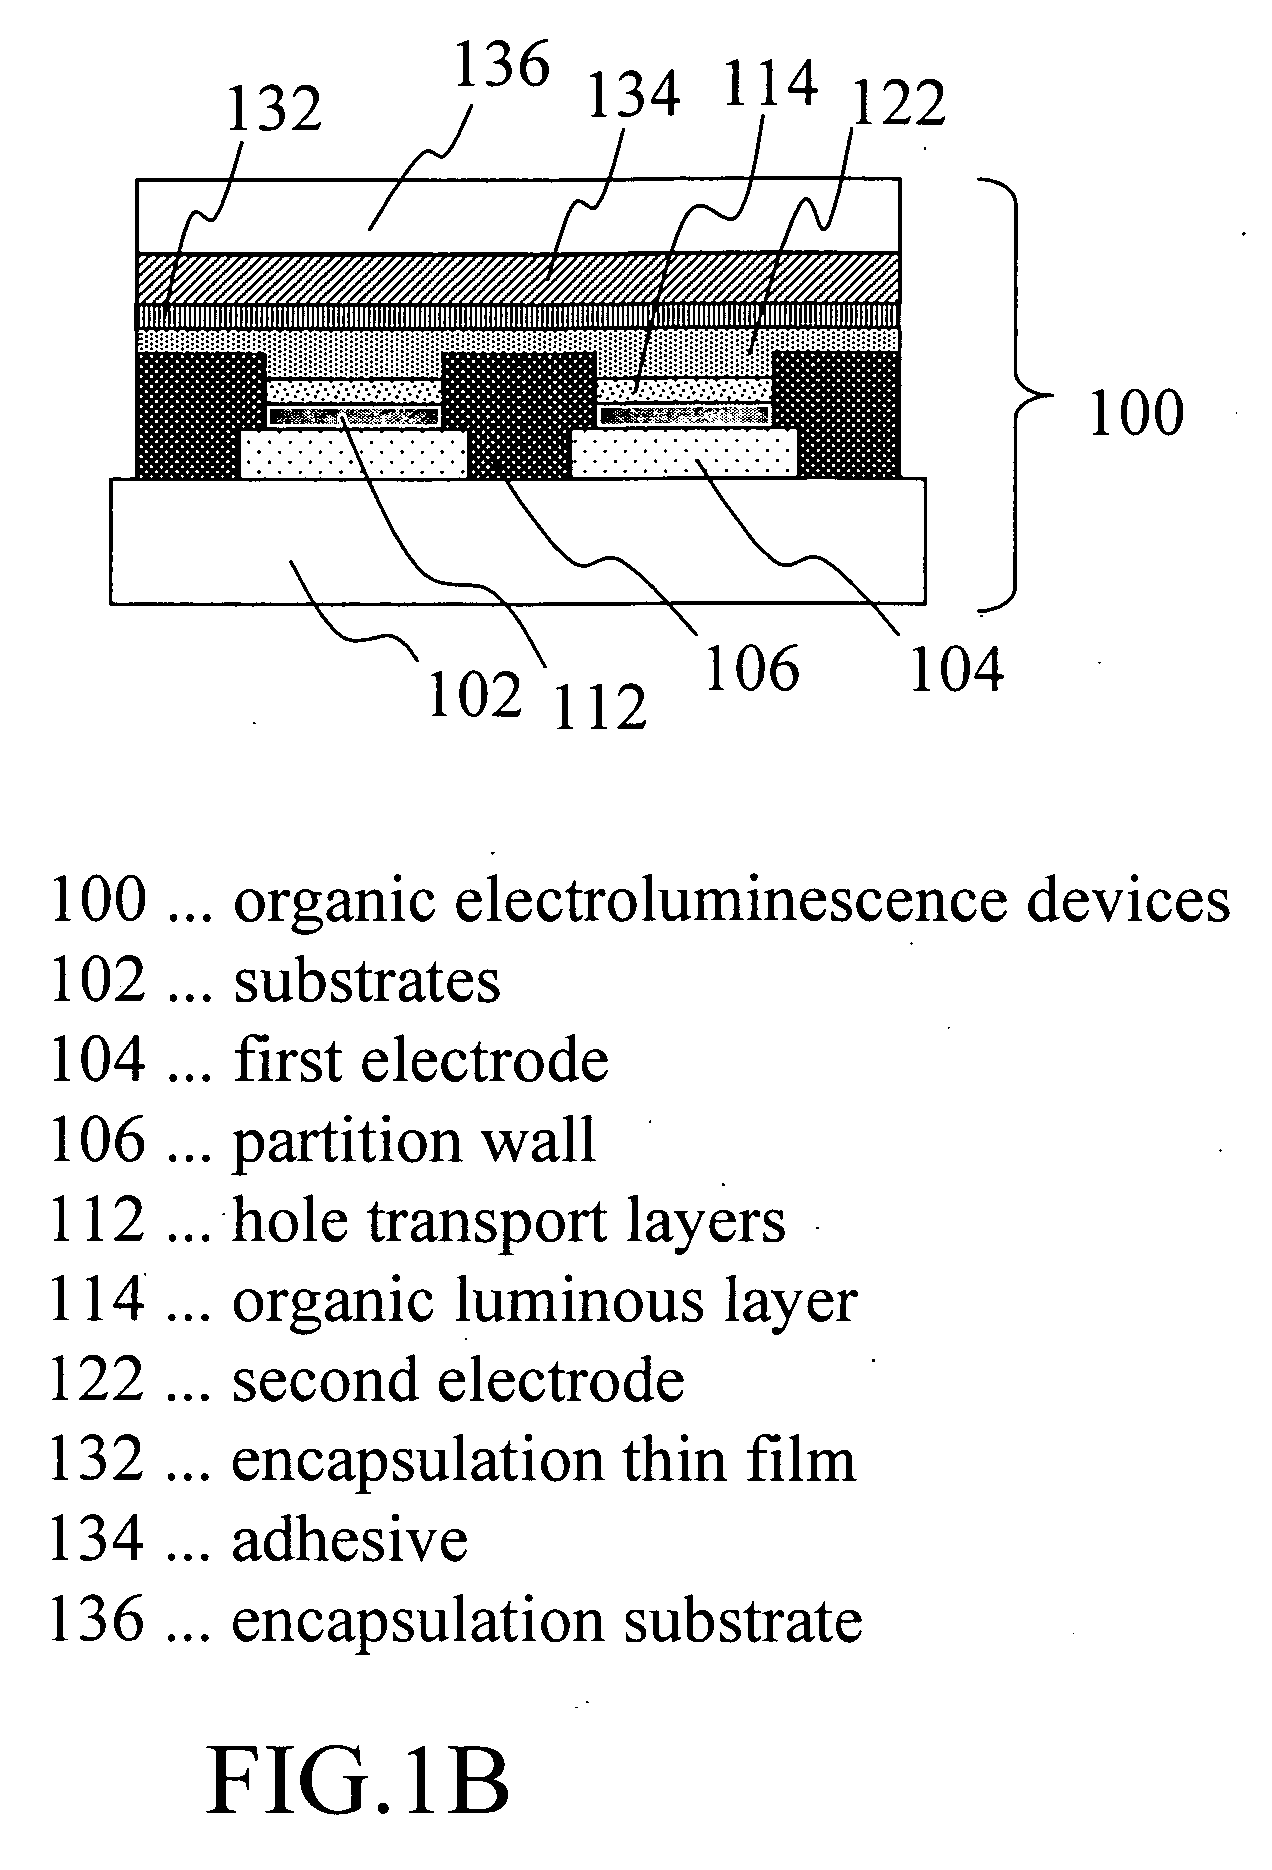 Manufacturing method of an organic electroluminescence device